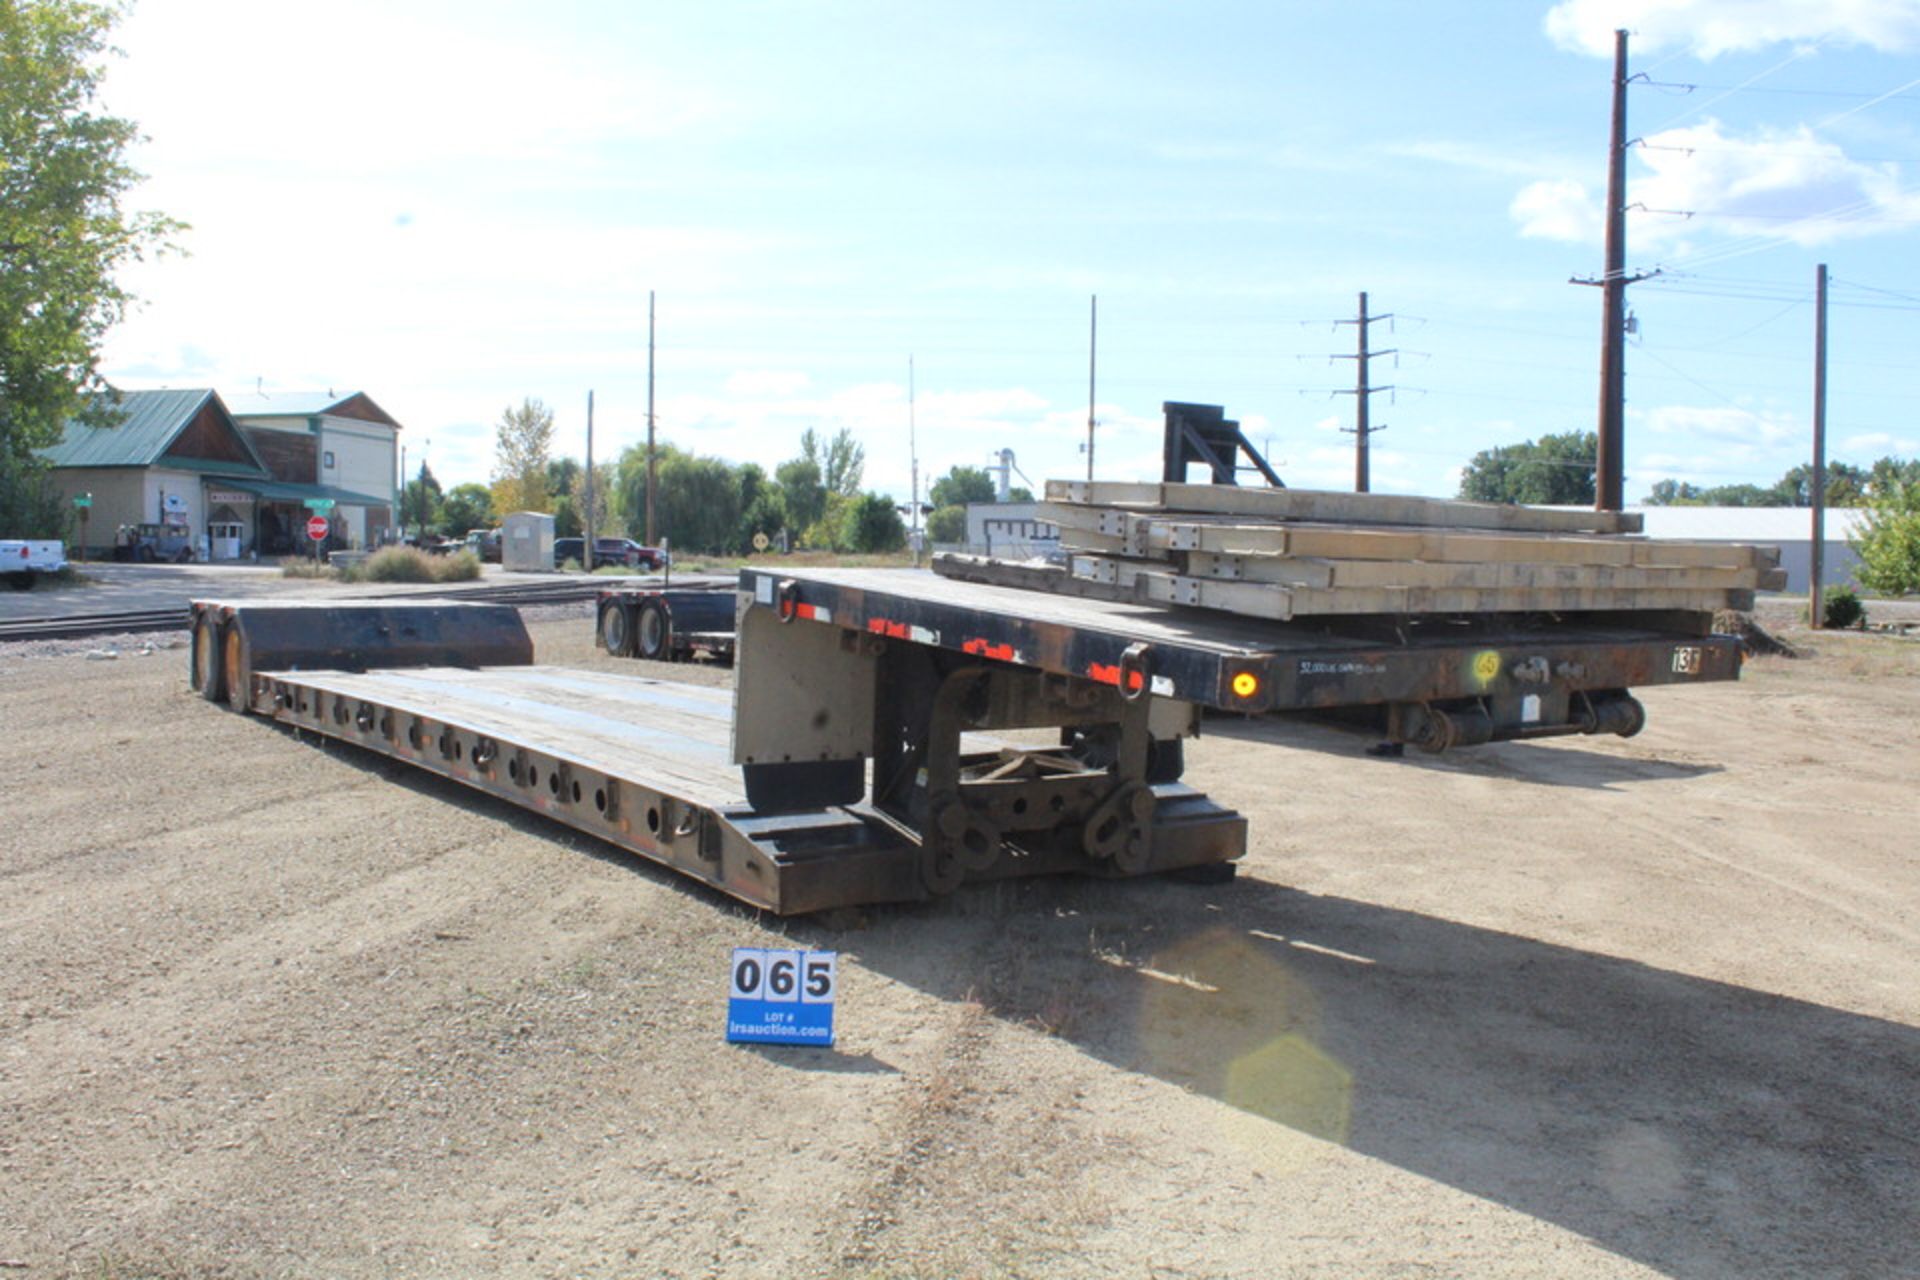 2007 FONTAINE 48' DOUBLE DROP TRAILER, DUAL AXEL, WELL WILL STRETCH TO APPROX 50'6" (LOCATION